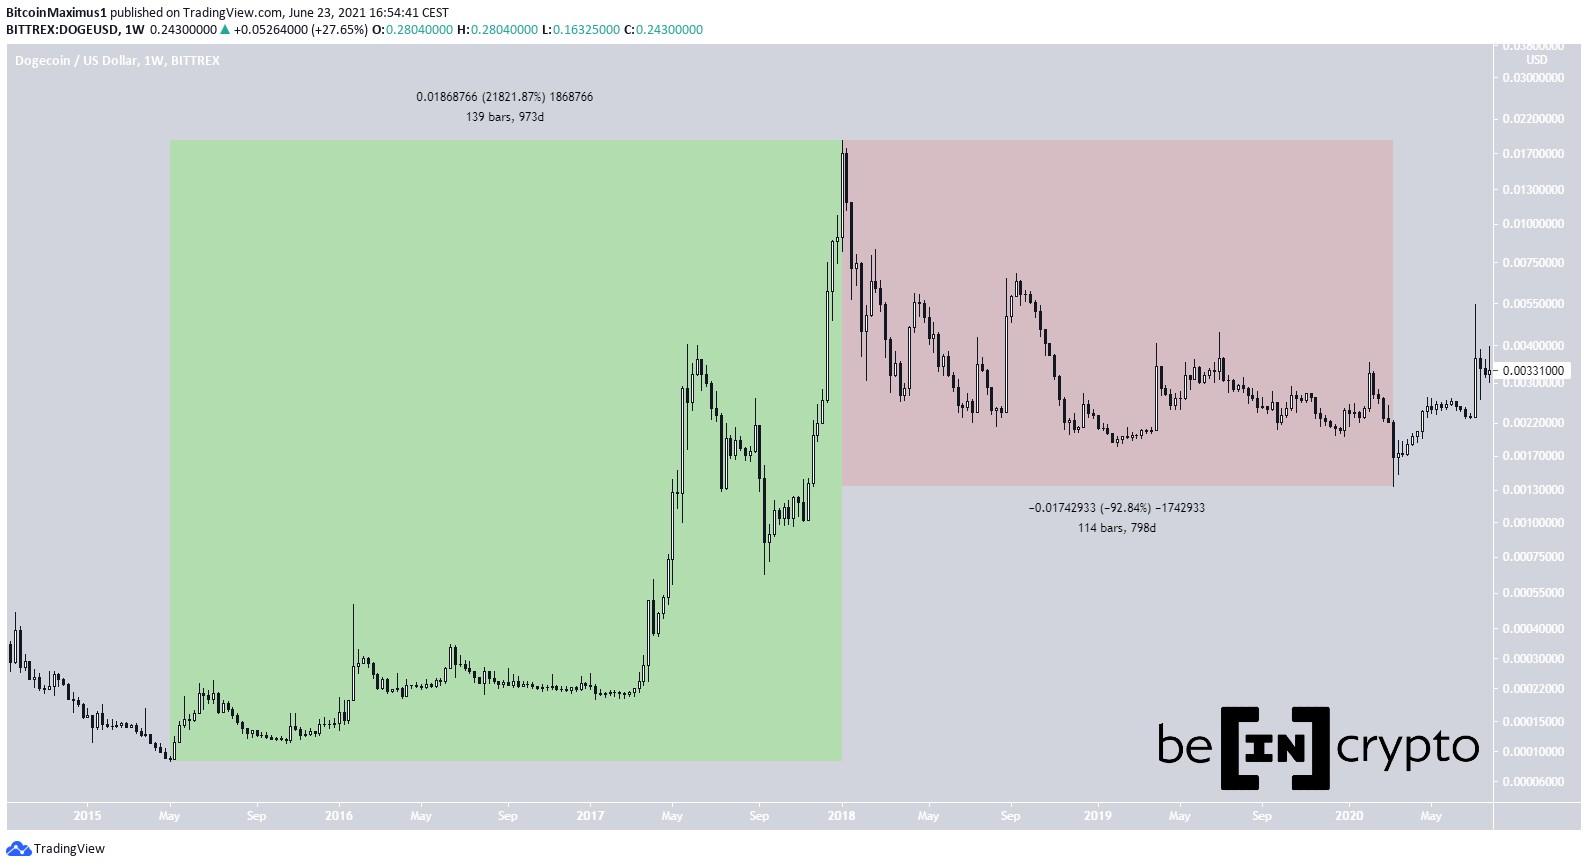 DOGE Analysis: Comparing Previous Cycles to Most Recent Cycle